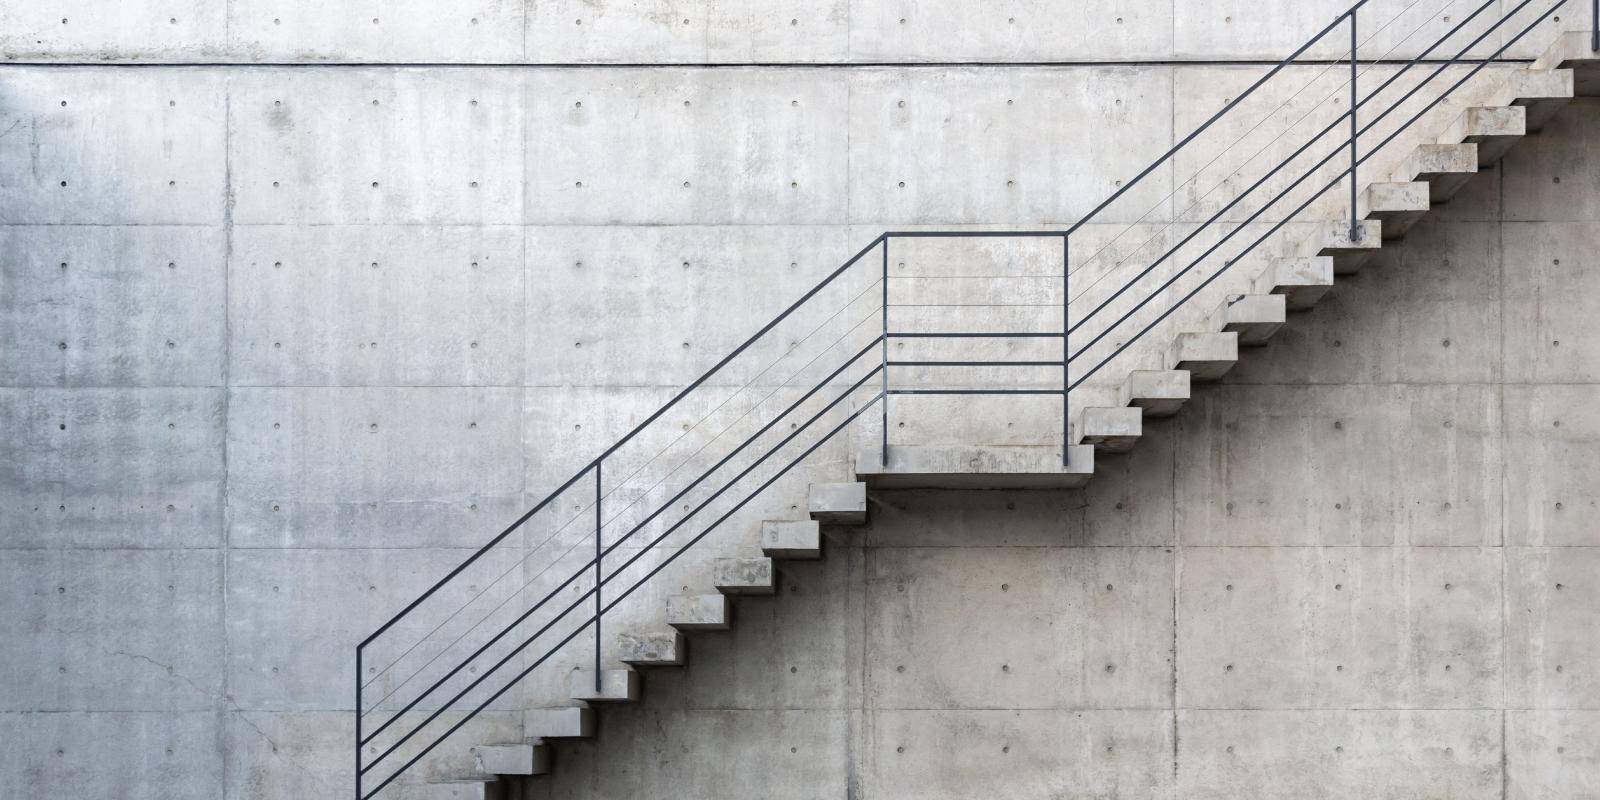 Staircase, Benesse Museum House, Naoshima, Japan. Copyright © Education Images/UIG via Getty Images.